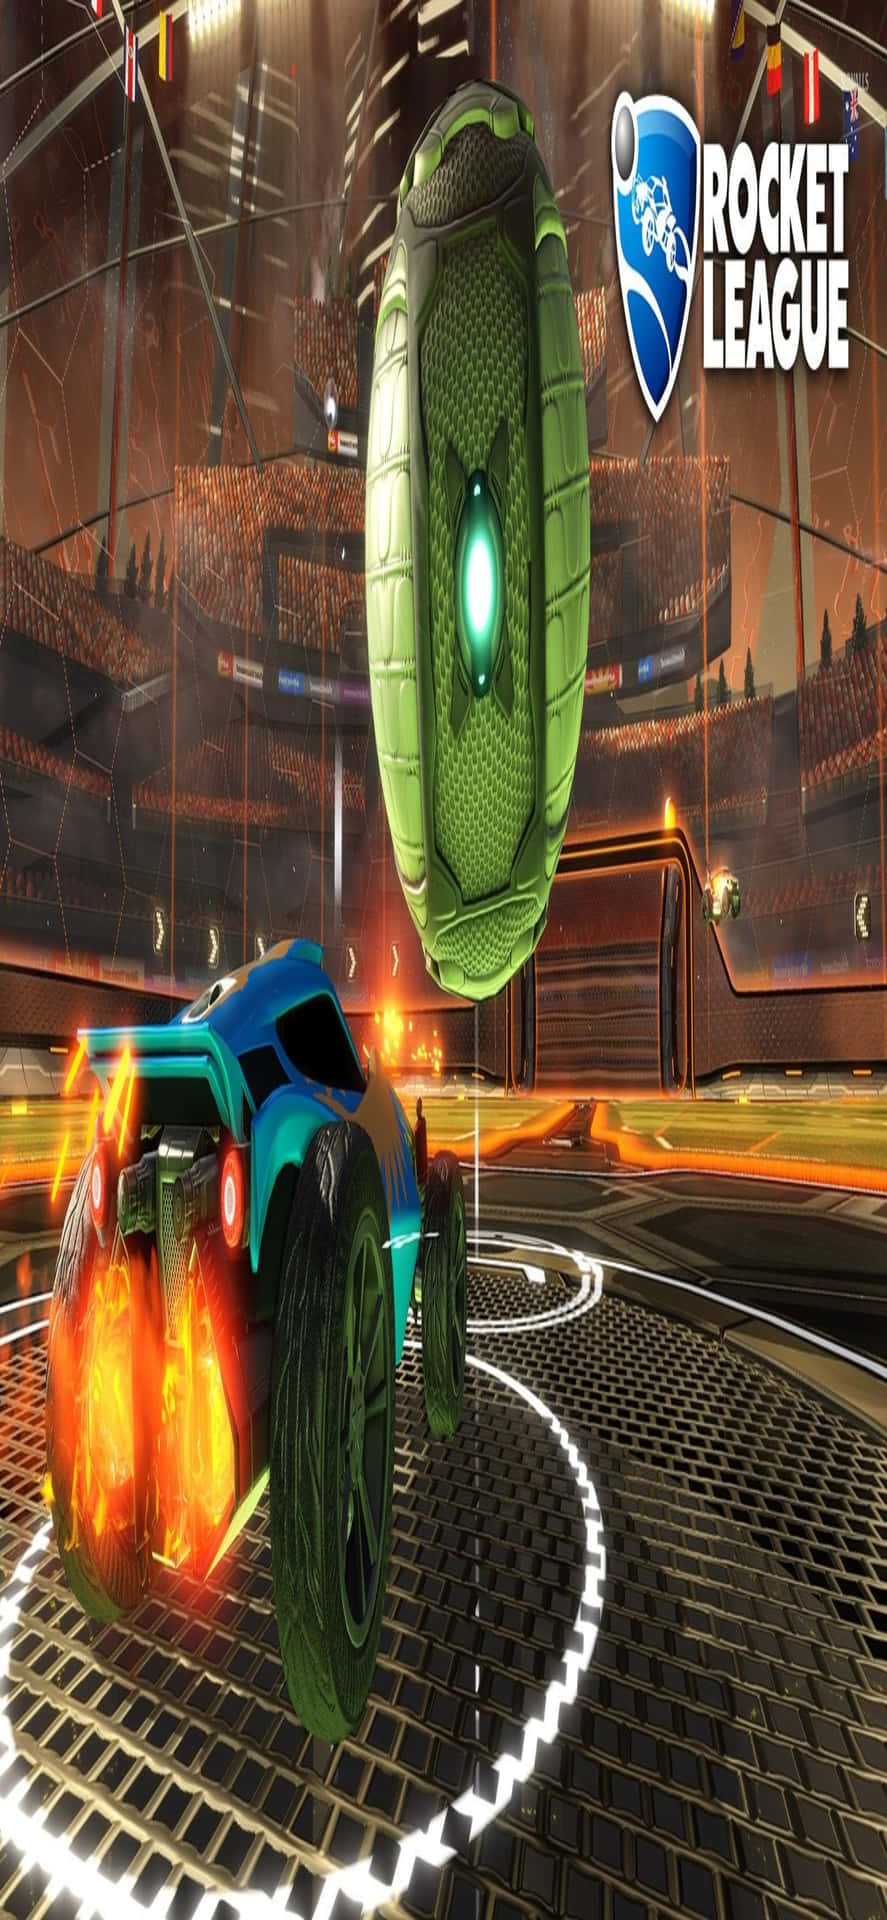 Ready to Rev Up Your Game with iPhone Xs Max and Rocket League